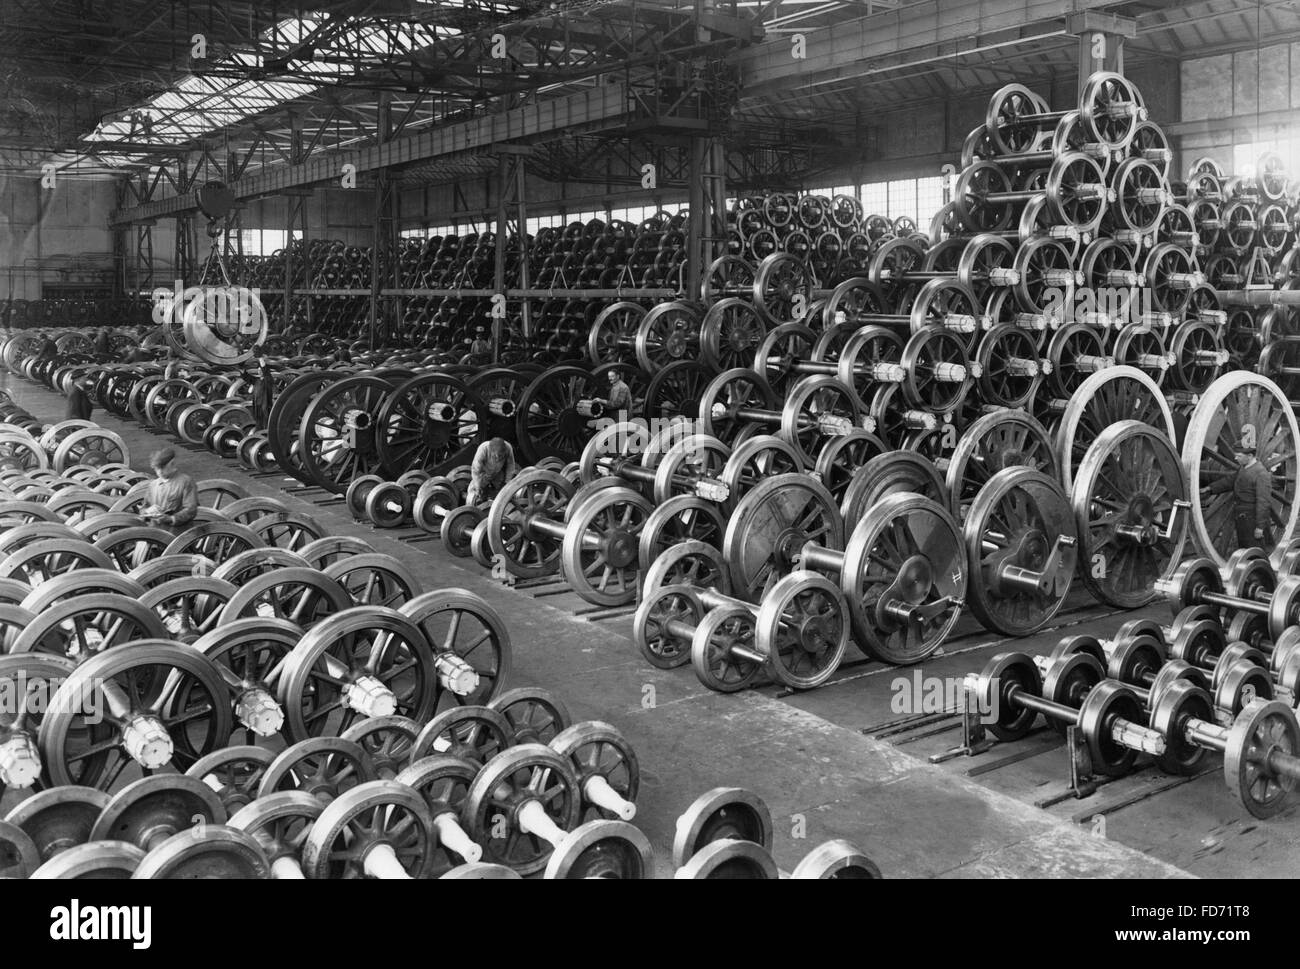 Wheelsets for locomotives, Germany, 1930s Stock Photo